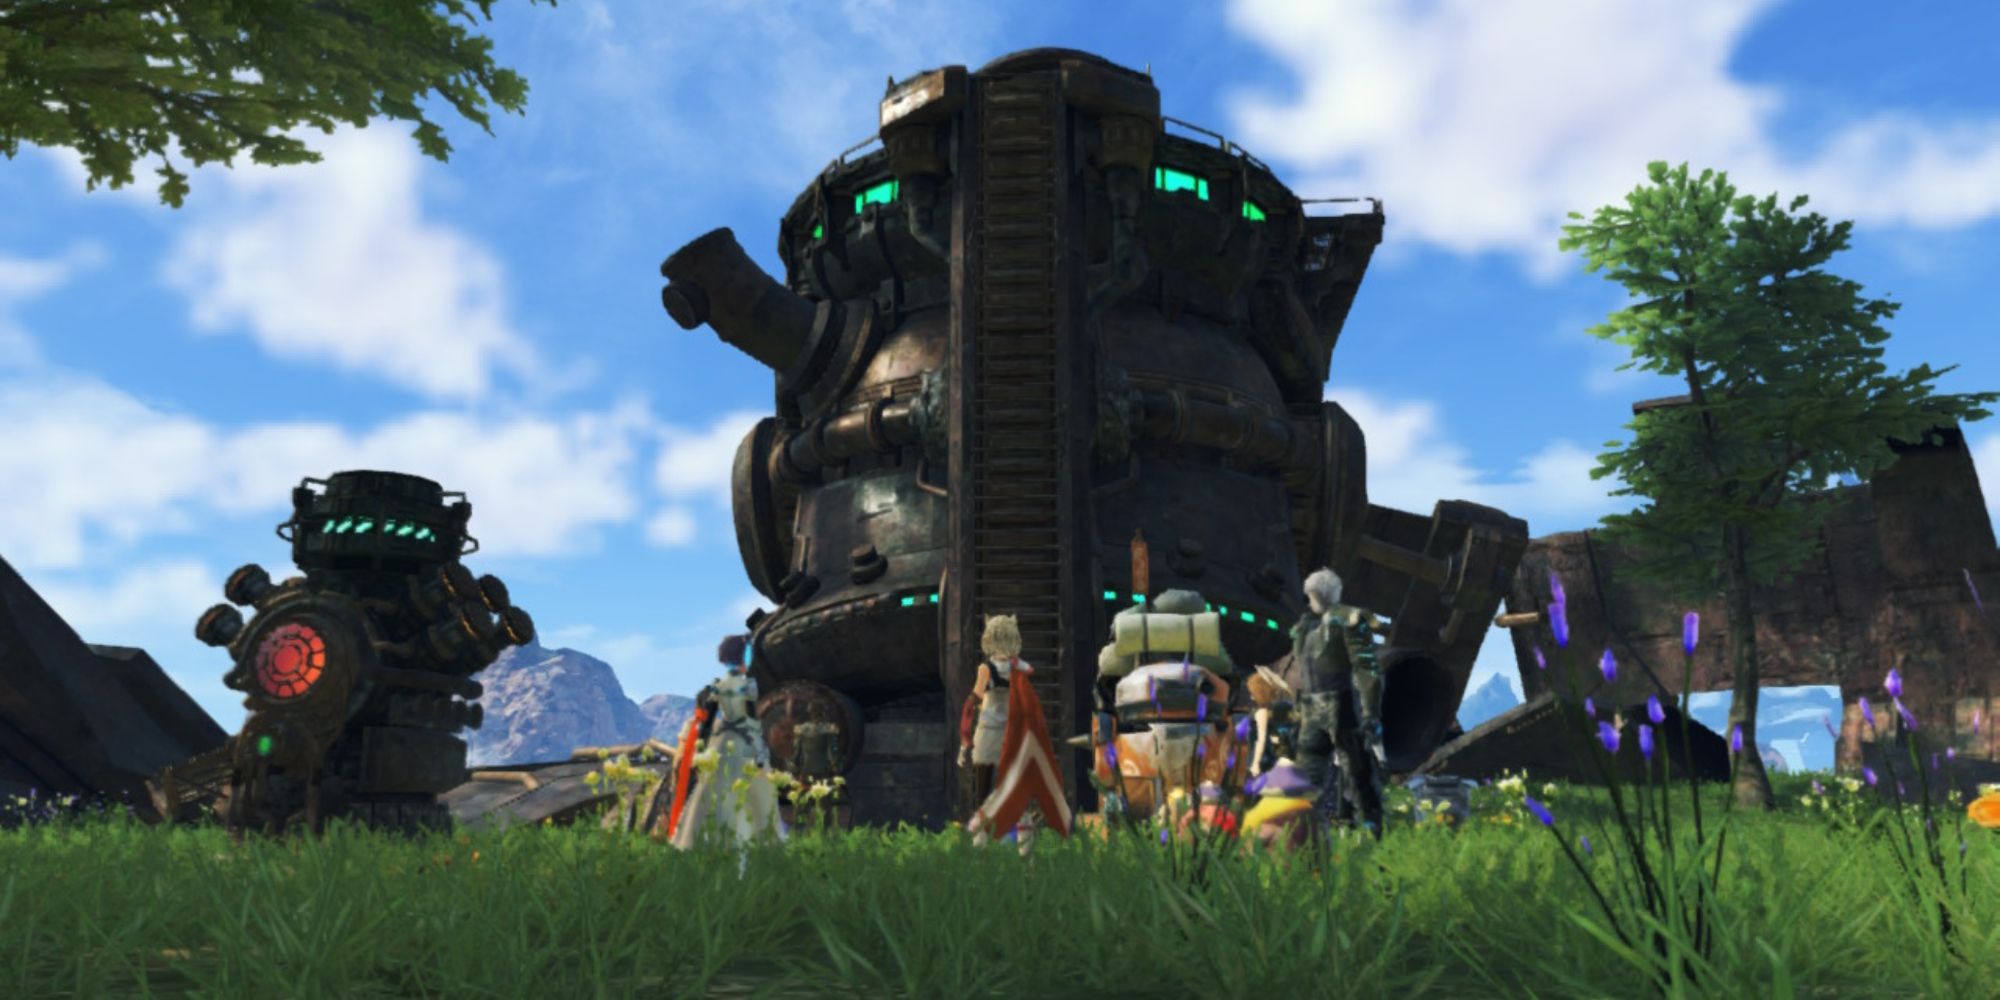 A Forronis Hulk in Xenoblade Chronicles 3